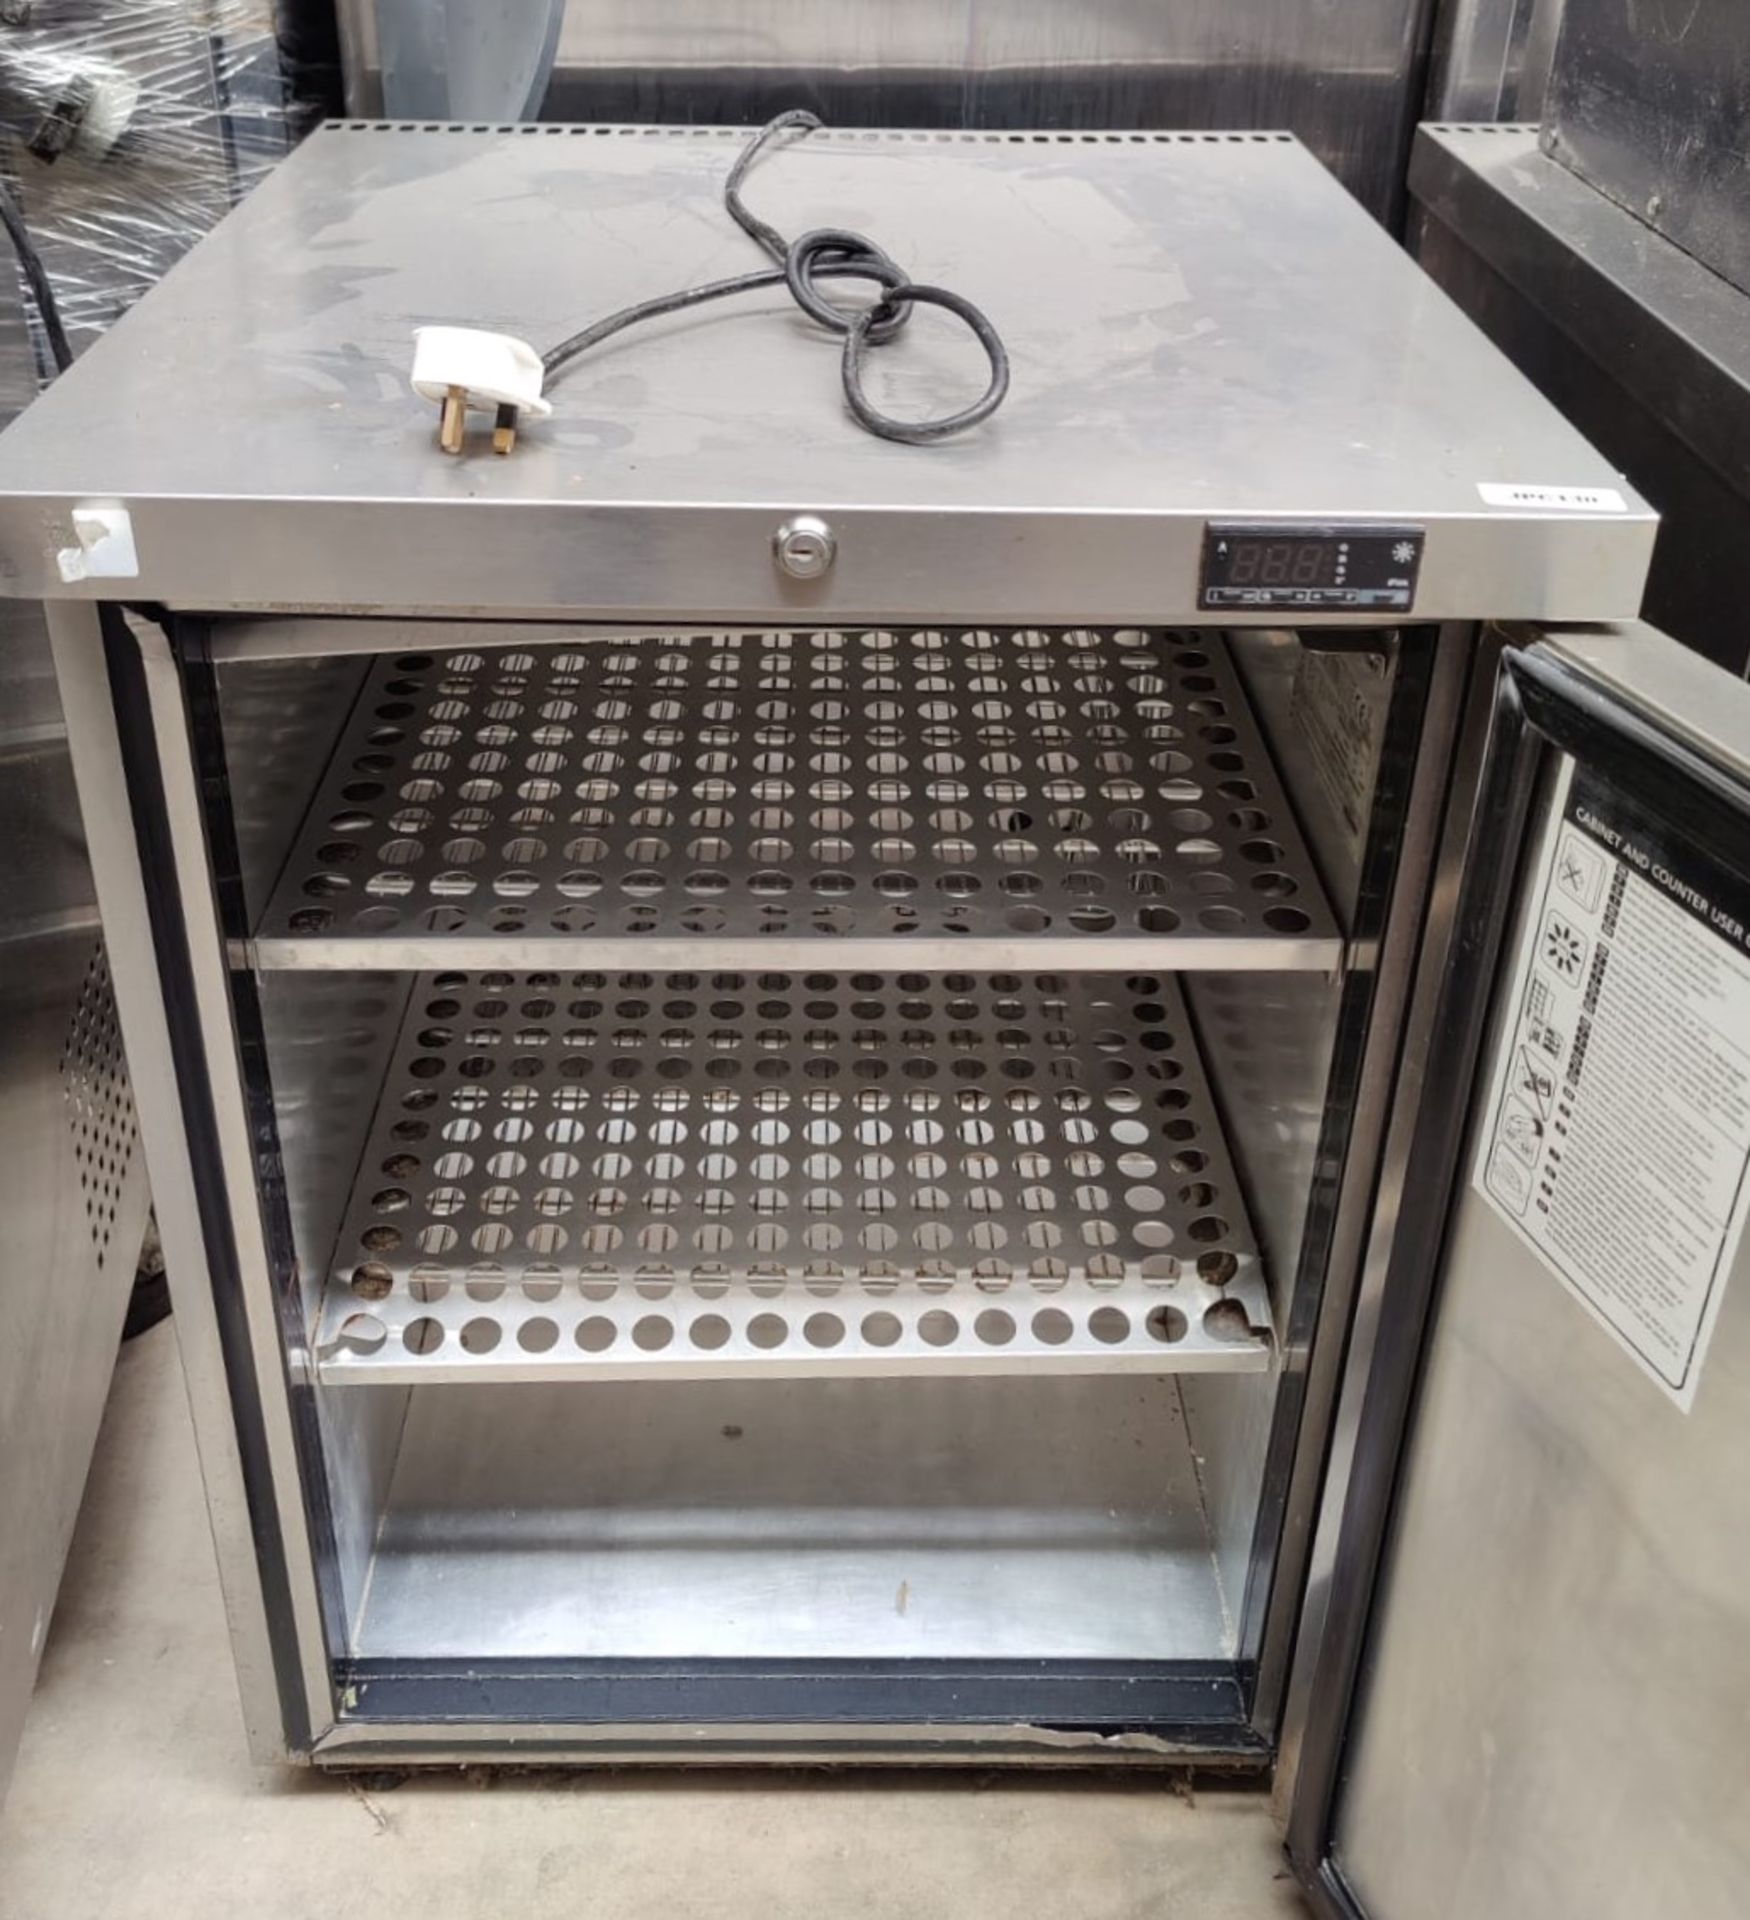 1 x Fosters Undercounter Freezer - Model LR150 - Stainless Steel Exterior - Image 2 of 4